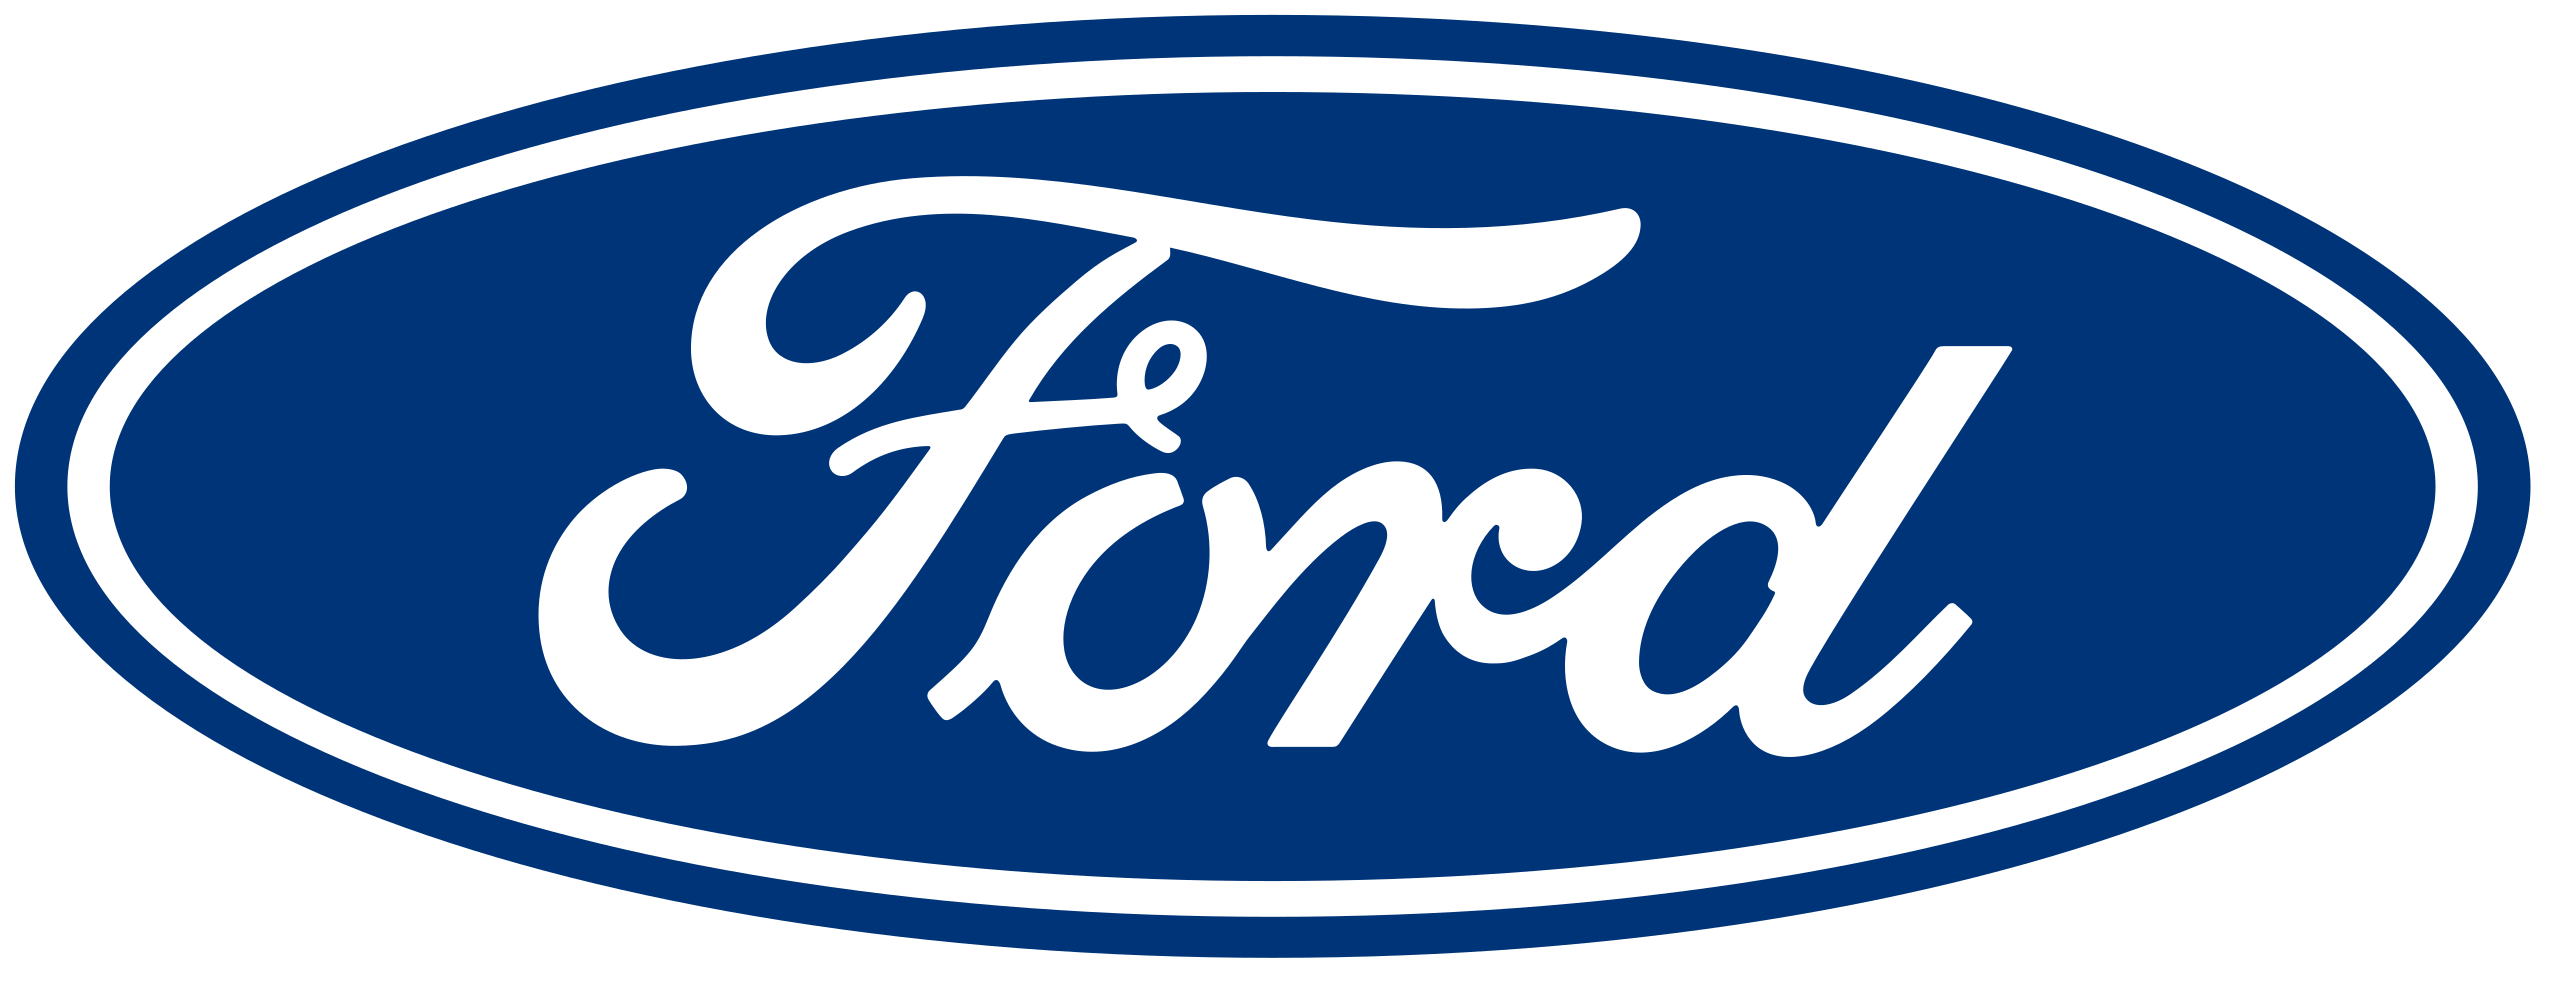 Ford has suspended operations in Russia